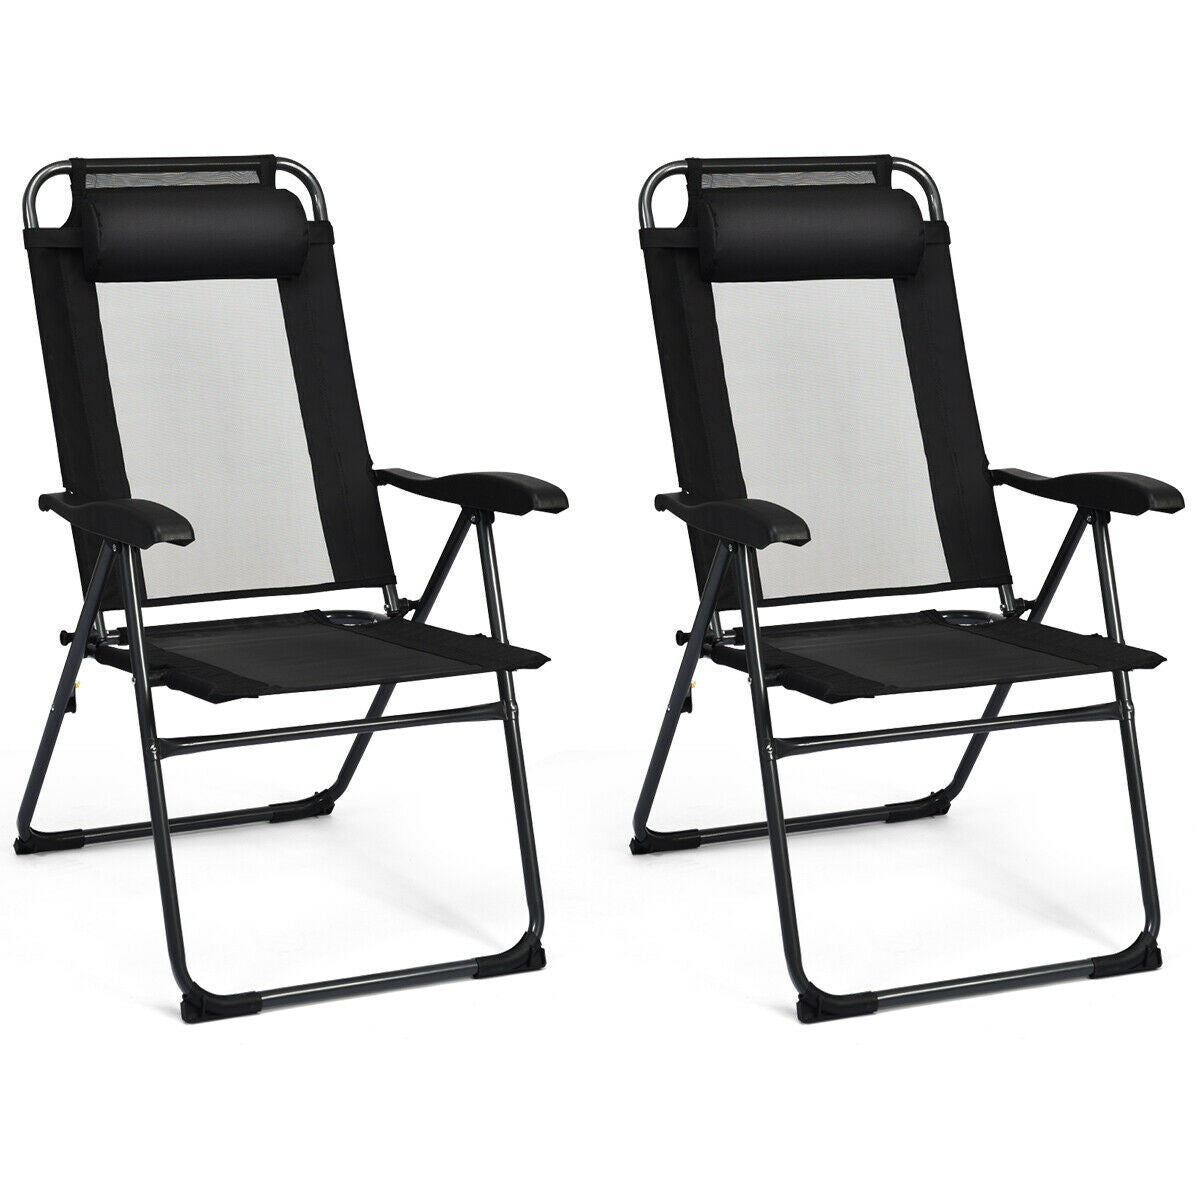 Giantex Set of 2 Patio Dining Chairs, Folding Lounge Chairs with 7 Level Adjustable Backrest